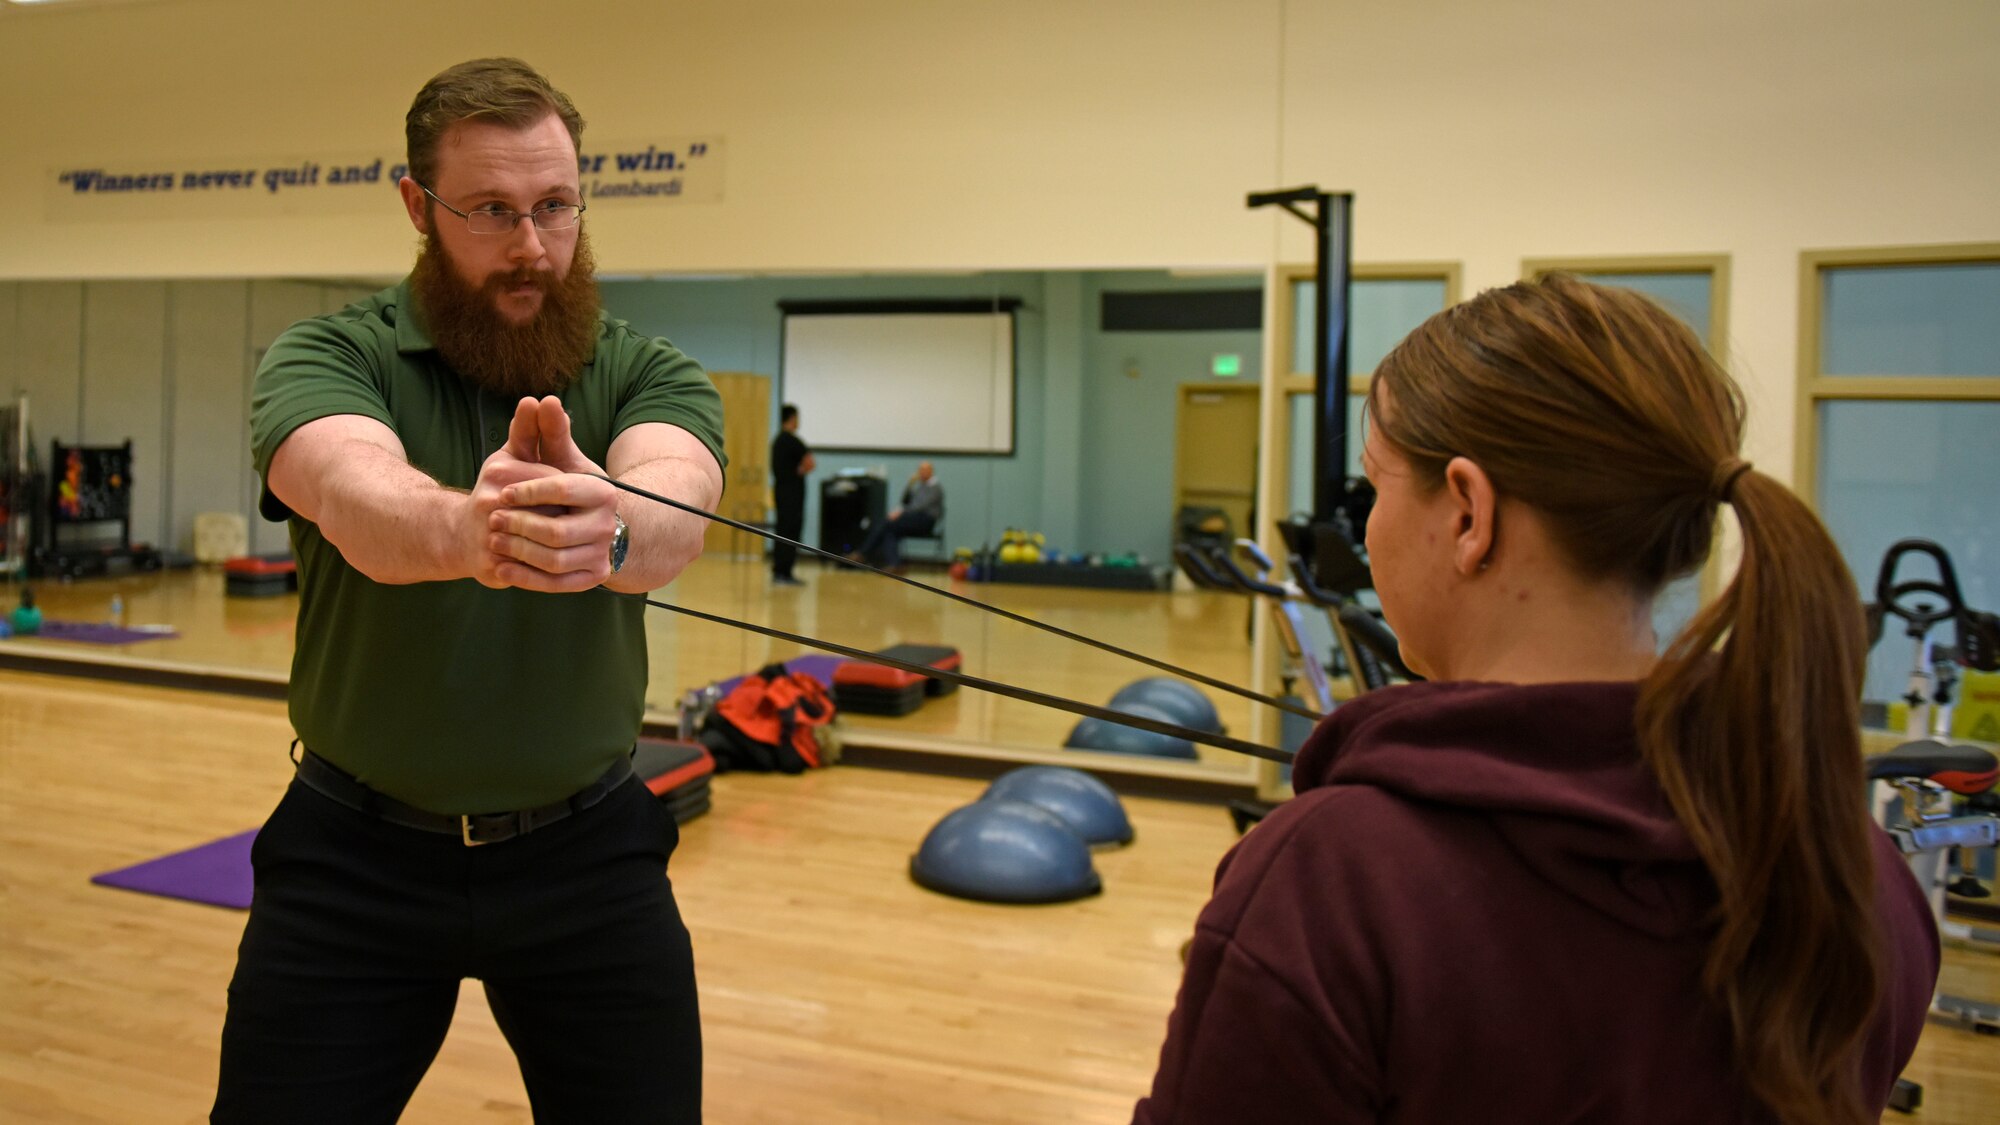 Justin Clifford, 92nd Medical Operations Squadron physical therapist, demonstrates resistance band training to Staff Sgt. Jamie Skrainka, 92nd Maintenance Squadron Human Performance Cell patient, at Fairchild Air Force Base, Washington, Feb. 26, 2018. Starting in October, all military members who have been non-deployable for more than 12 consecutive months, for any reason, will be processed for administrative separation. The HPC program’s objective is to reduce the number of non-deployable service members and improve personnel readiness across the force. (U.S. Air Force photo/Airman 1st Class Jesenia Landaverde)